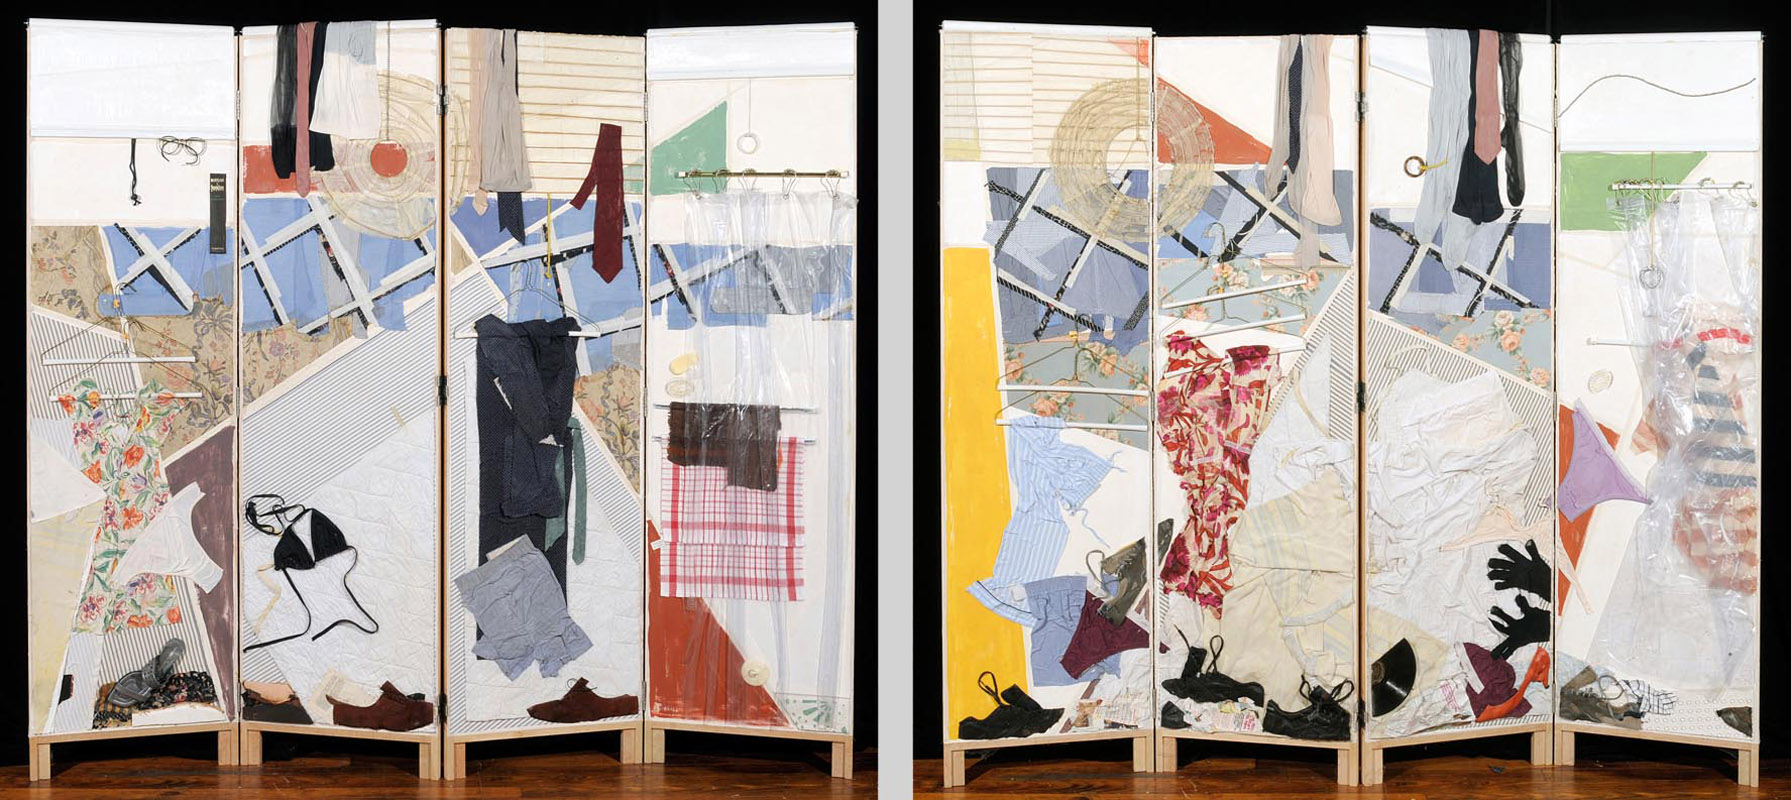   #64, The Bed and the Shower; "He's Not Worth Your Tears"  front and back of folding screen - 8 panels each 76 h x 22 inches, 2007 